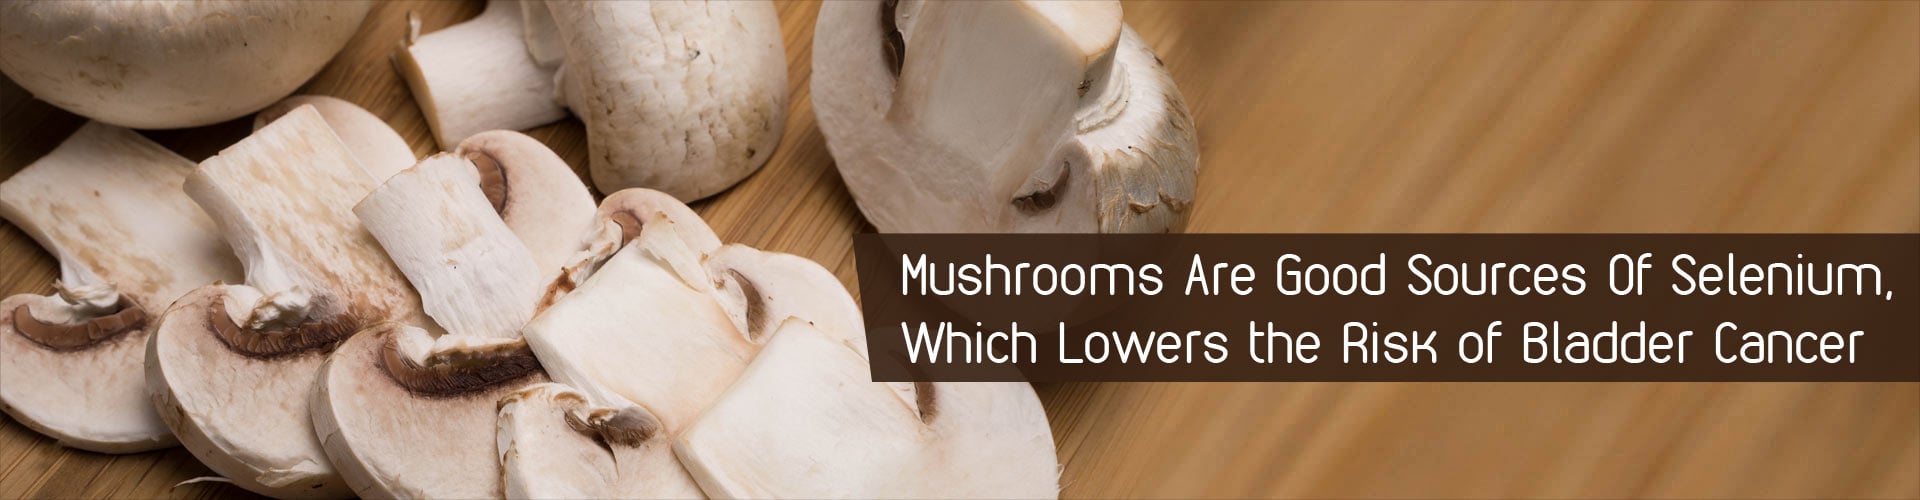 Mushrooms Are Good Sources Of Selenium, Which Lower the Risk of Bladder Cancer